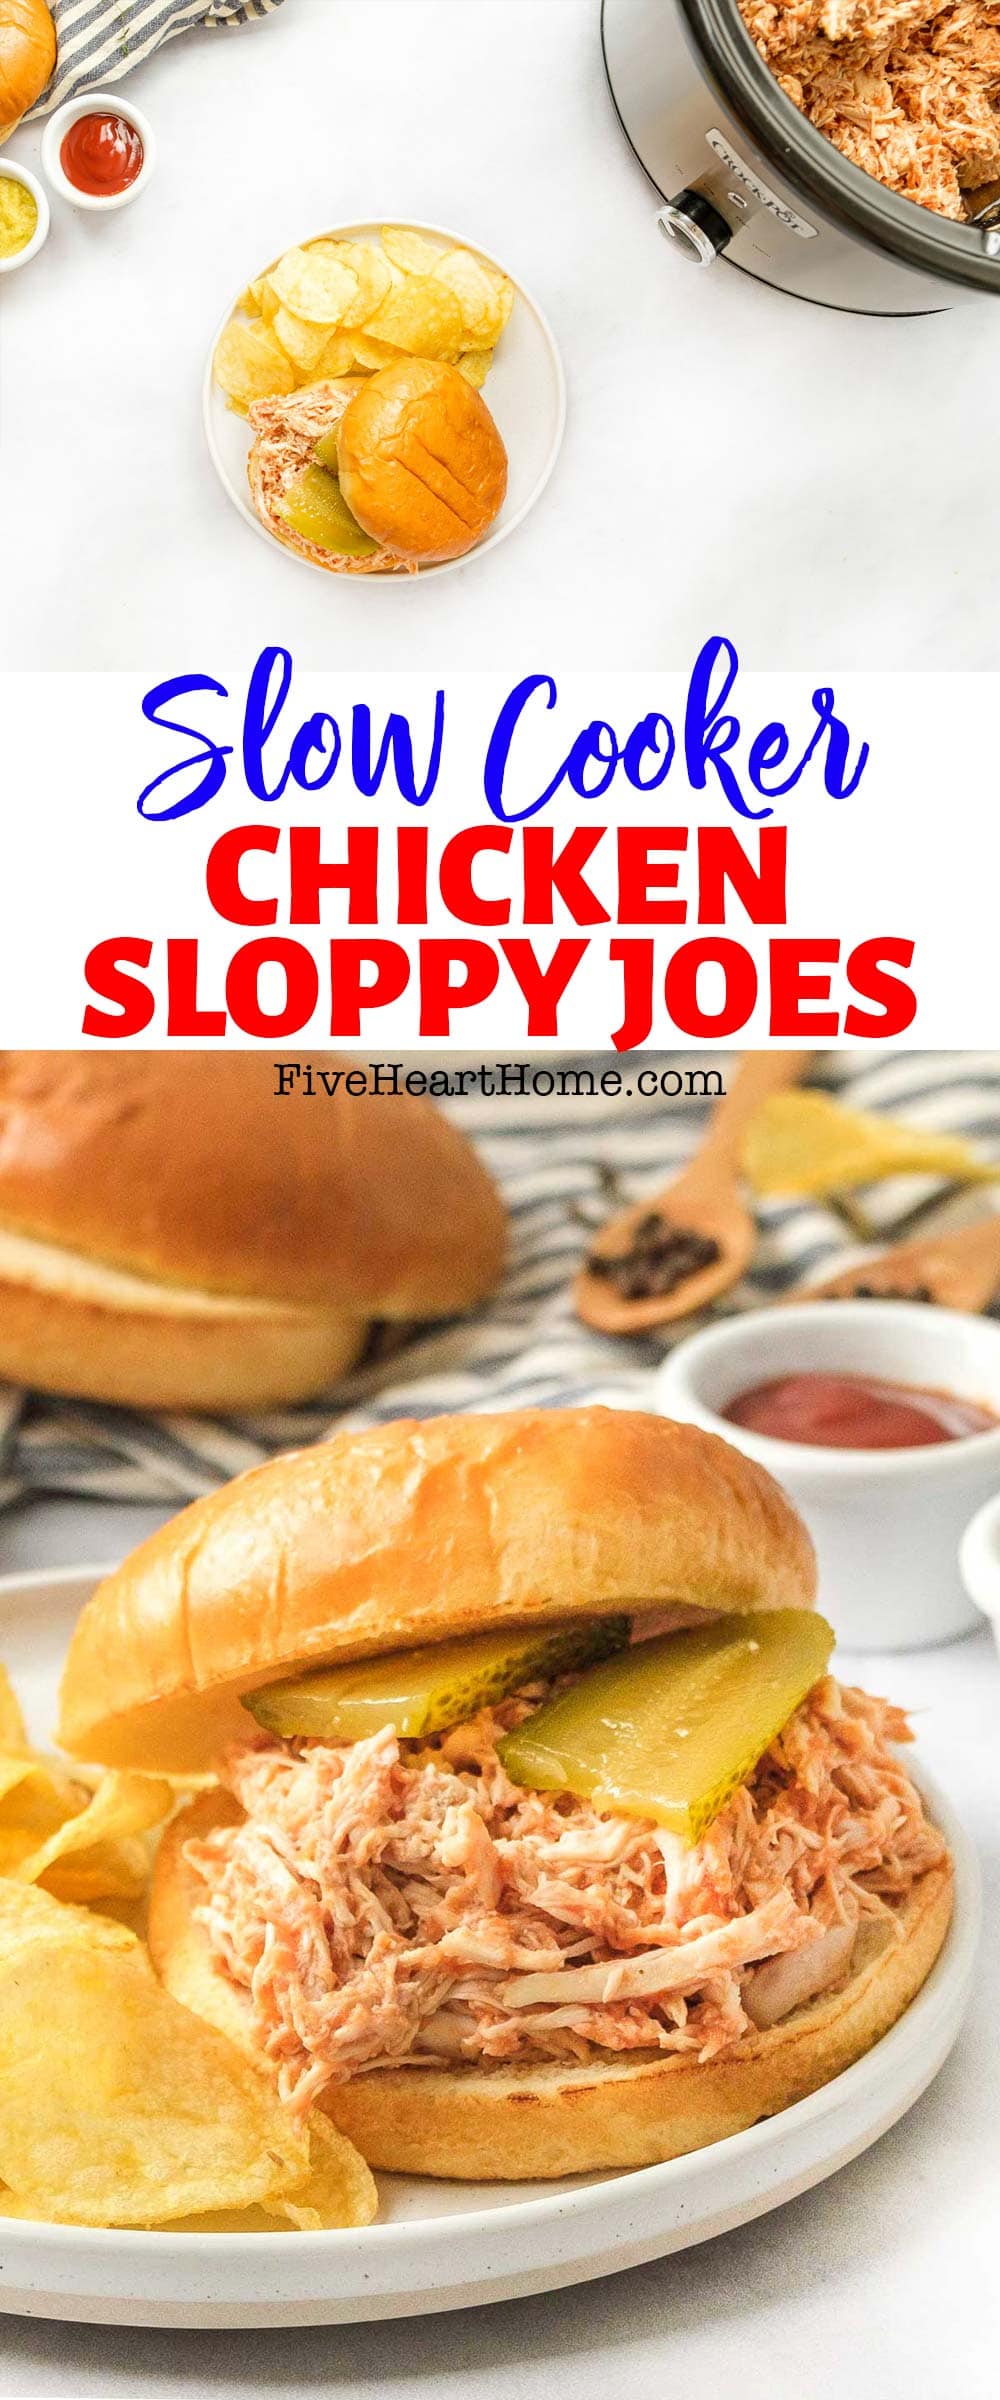 Chicken Sloppy Joes ~ combine juicy shredded chicken with a quick, homemade sloppy joe sauce for messy, yummy sandwiches that effortlessly come together in the crockpot and are sure to please the entire family! | FiveHeartHome.com via @fivehearthome